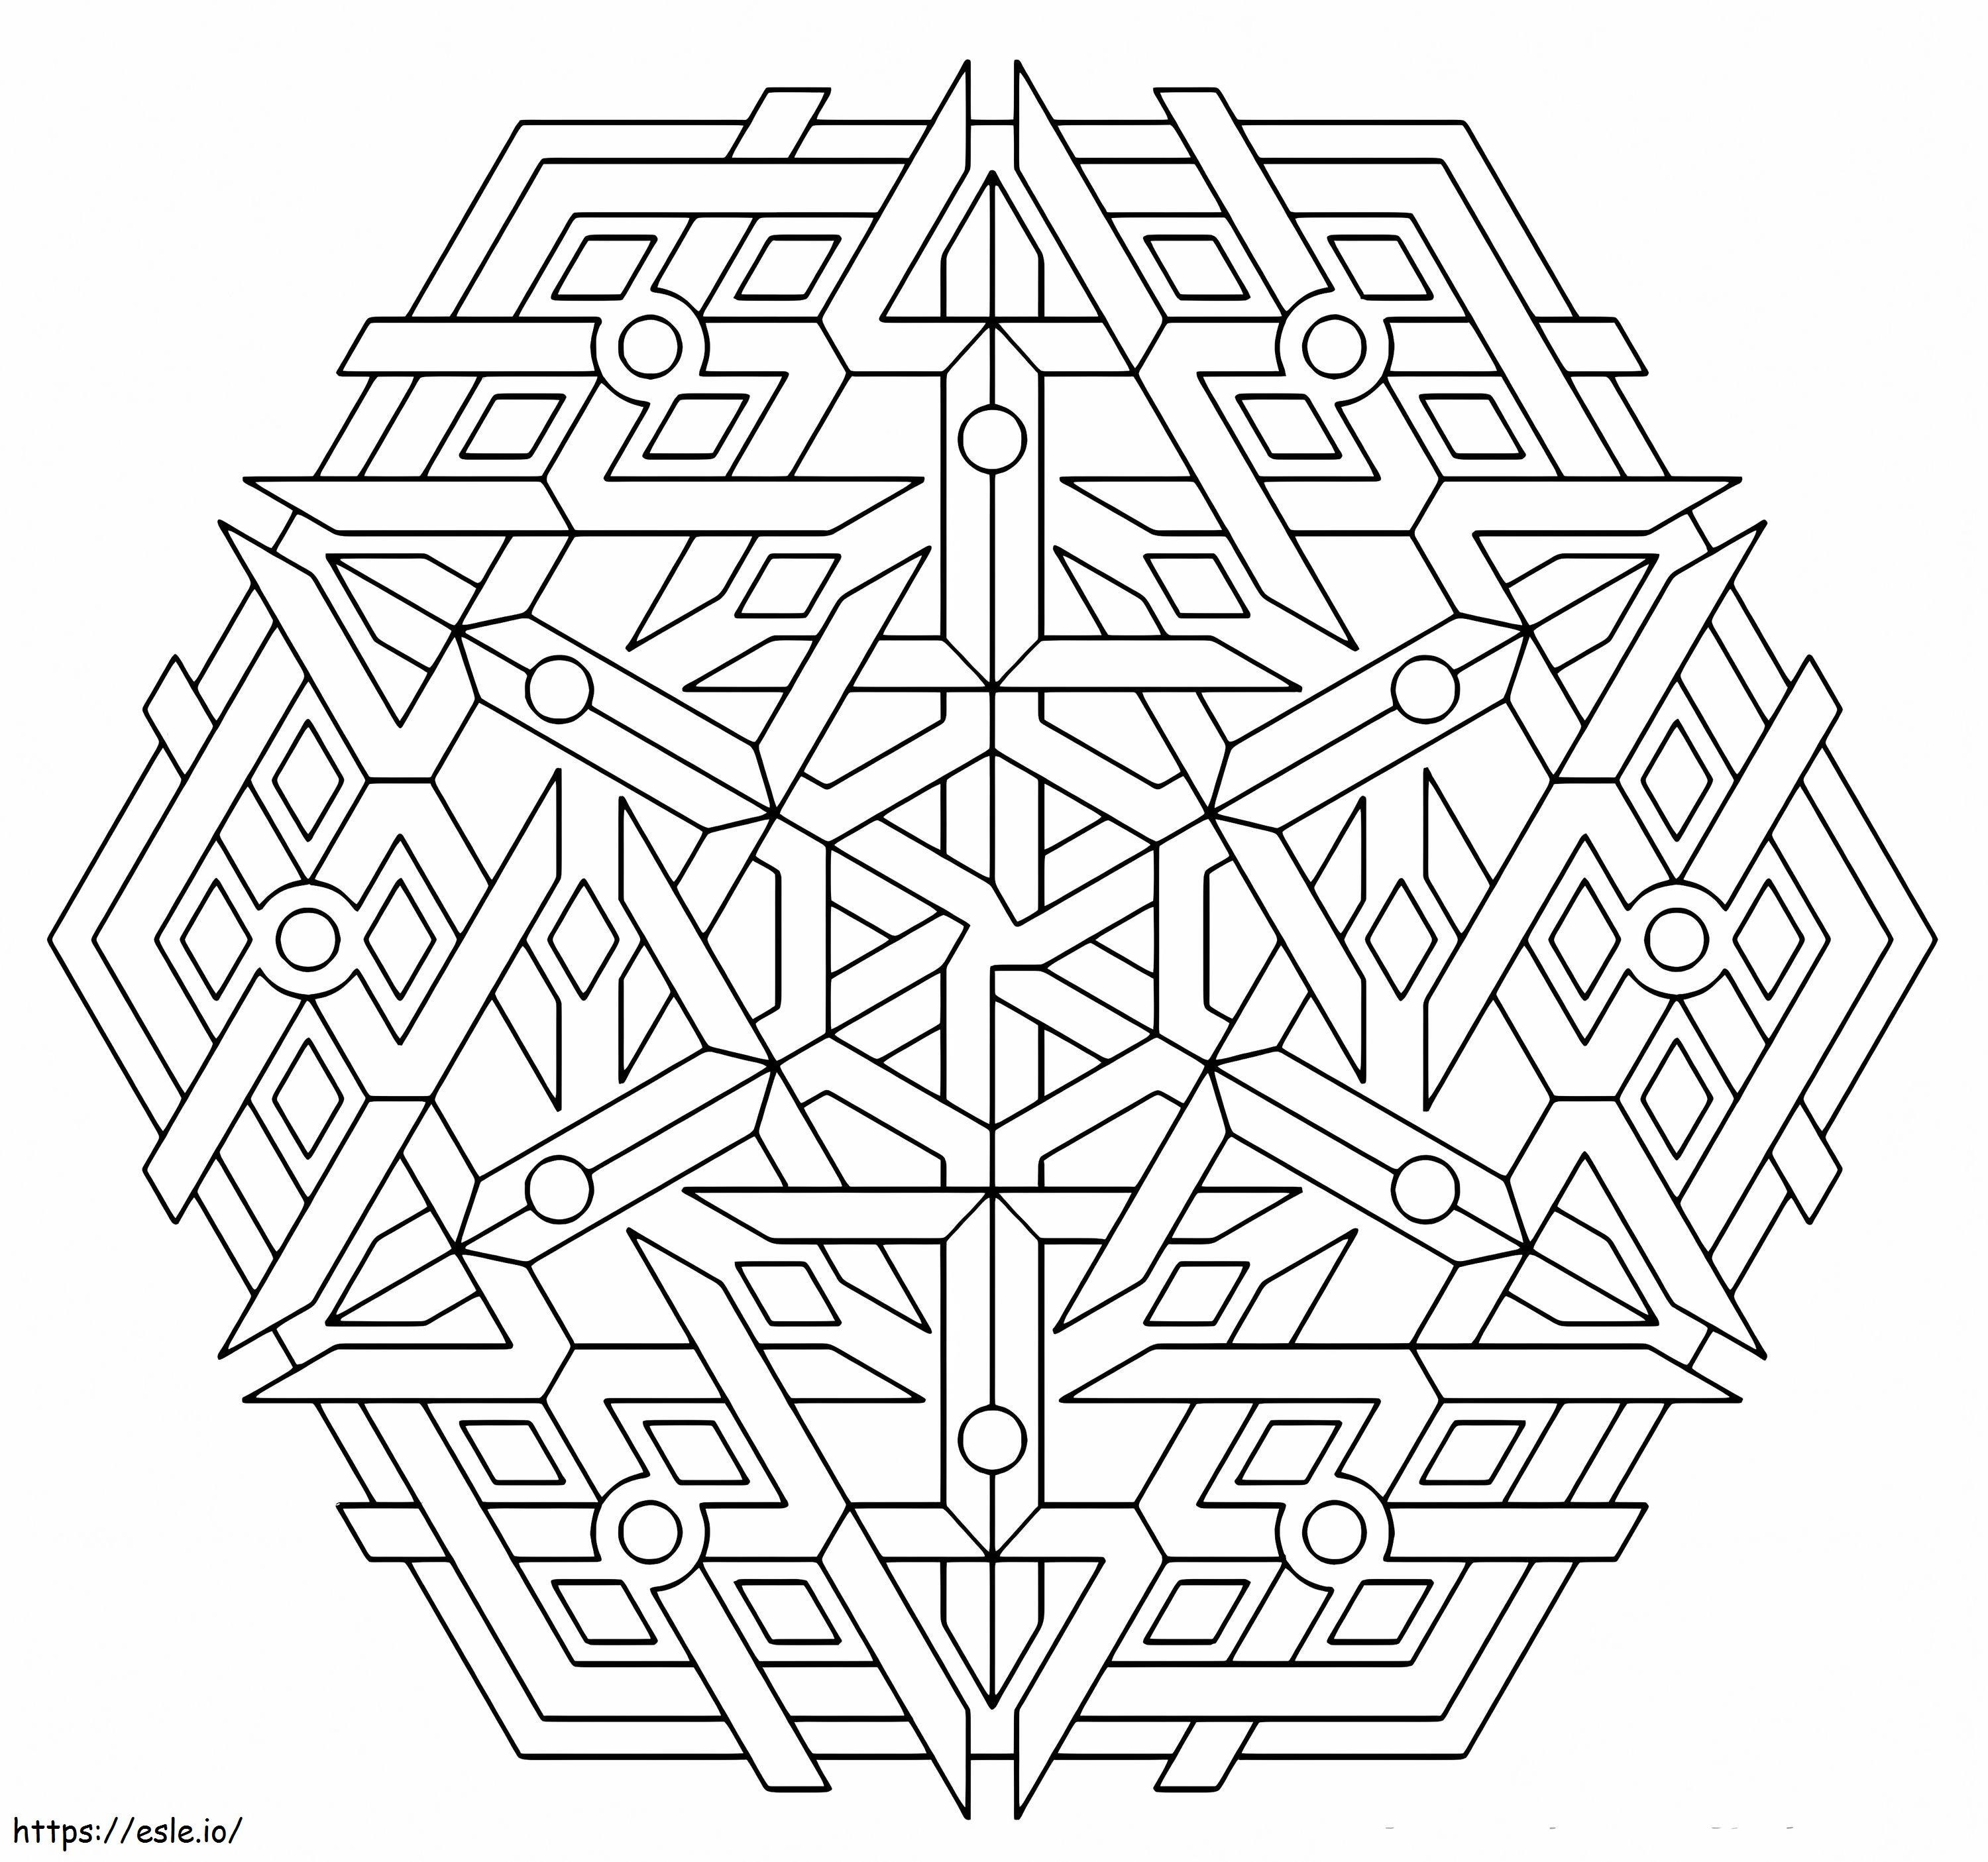 Geometric Hexagon Complex coloring page